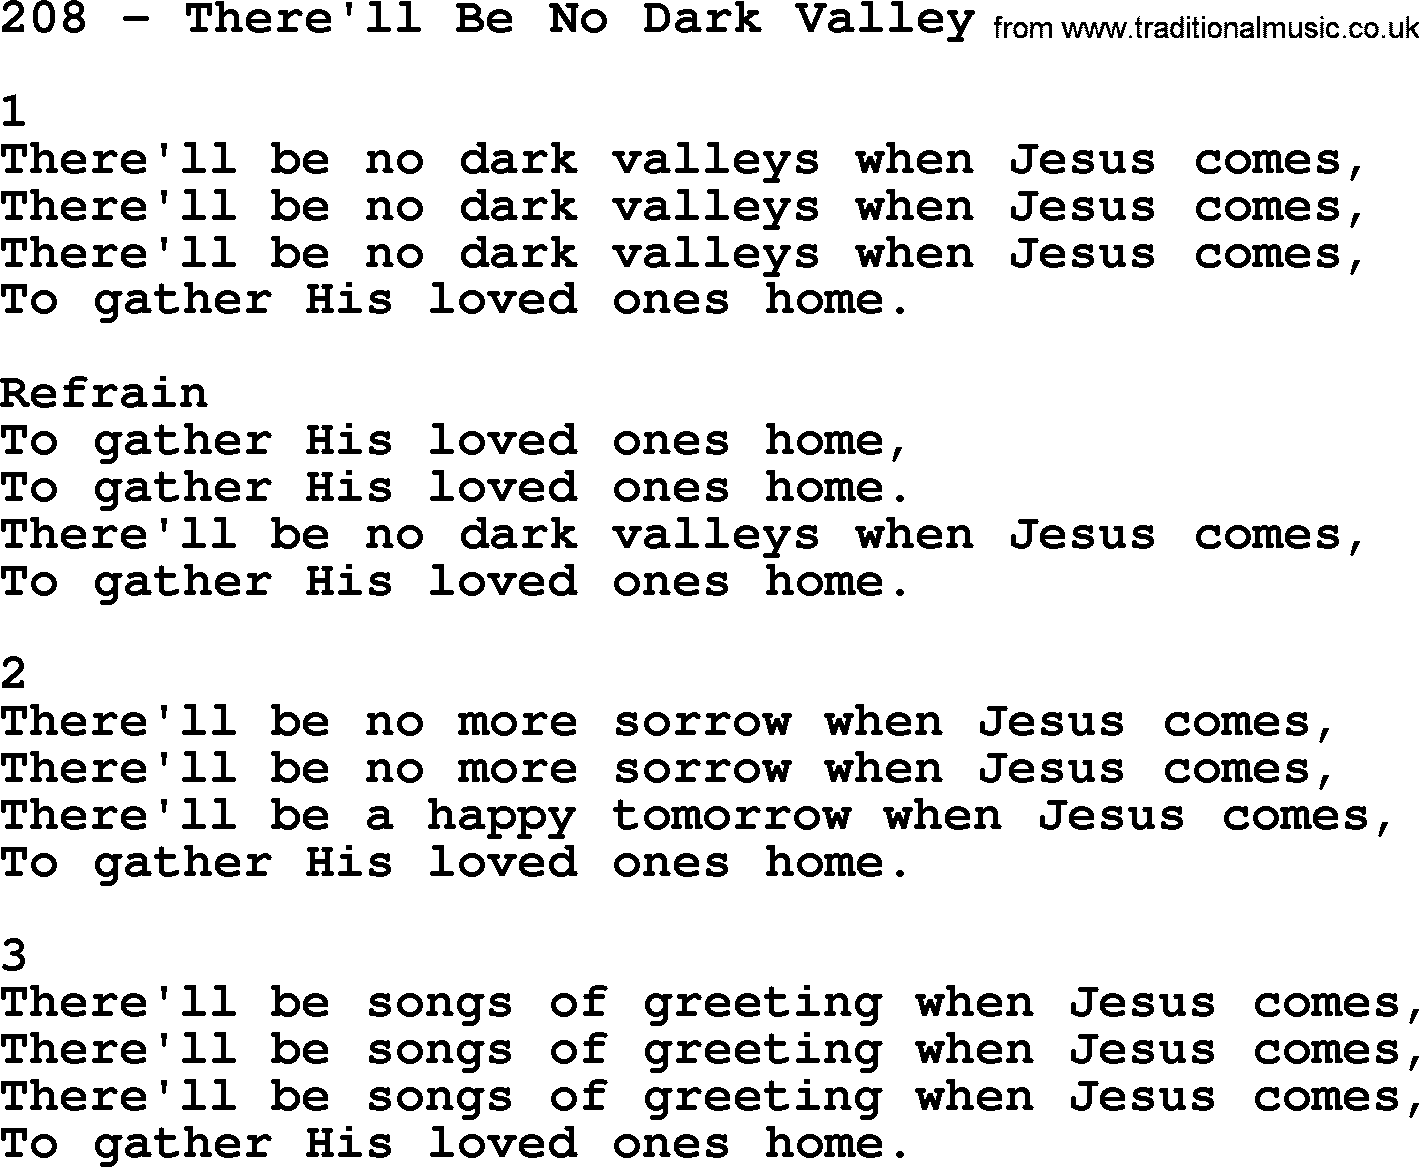 Complete Adventis Hymnal, title: 208-There'll Be No Dark Valley, with lyrics, midi, mp3, powerpoints(PPT) and PDF,